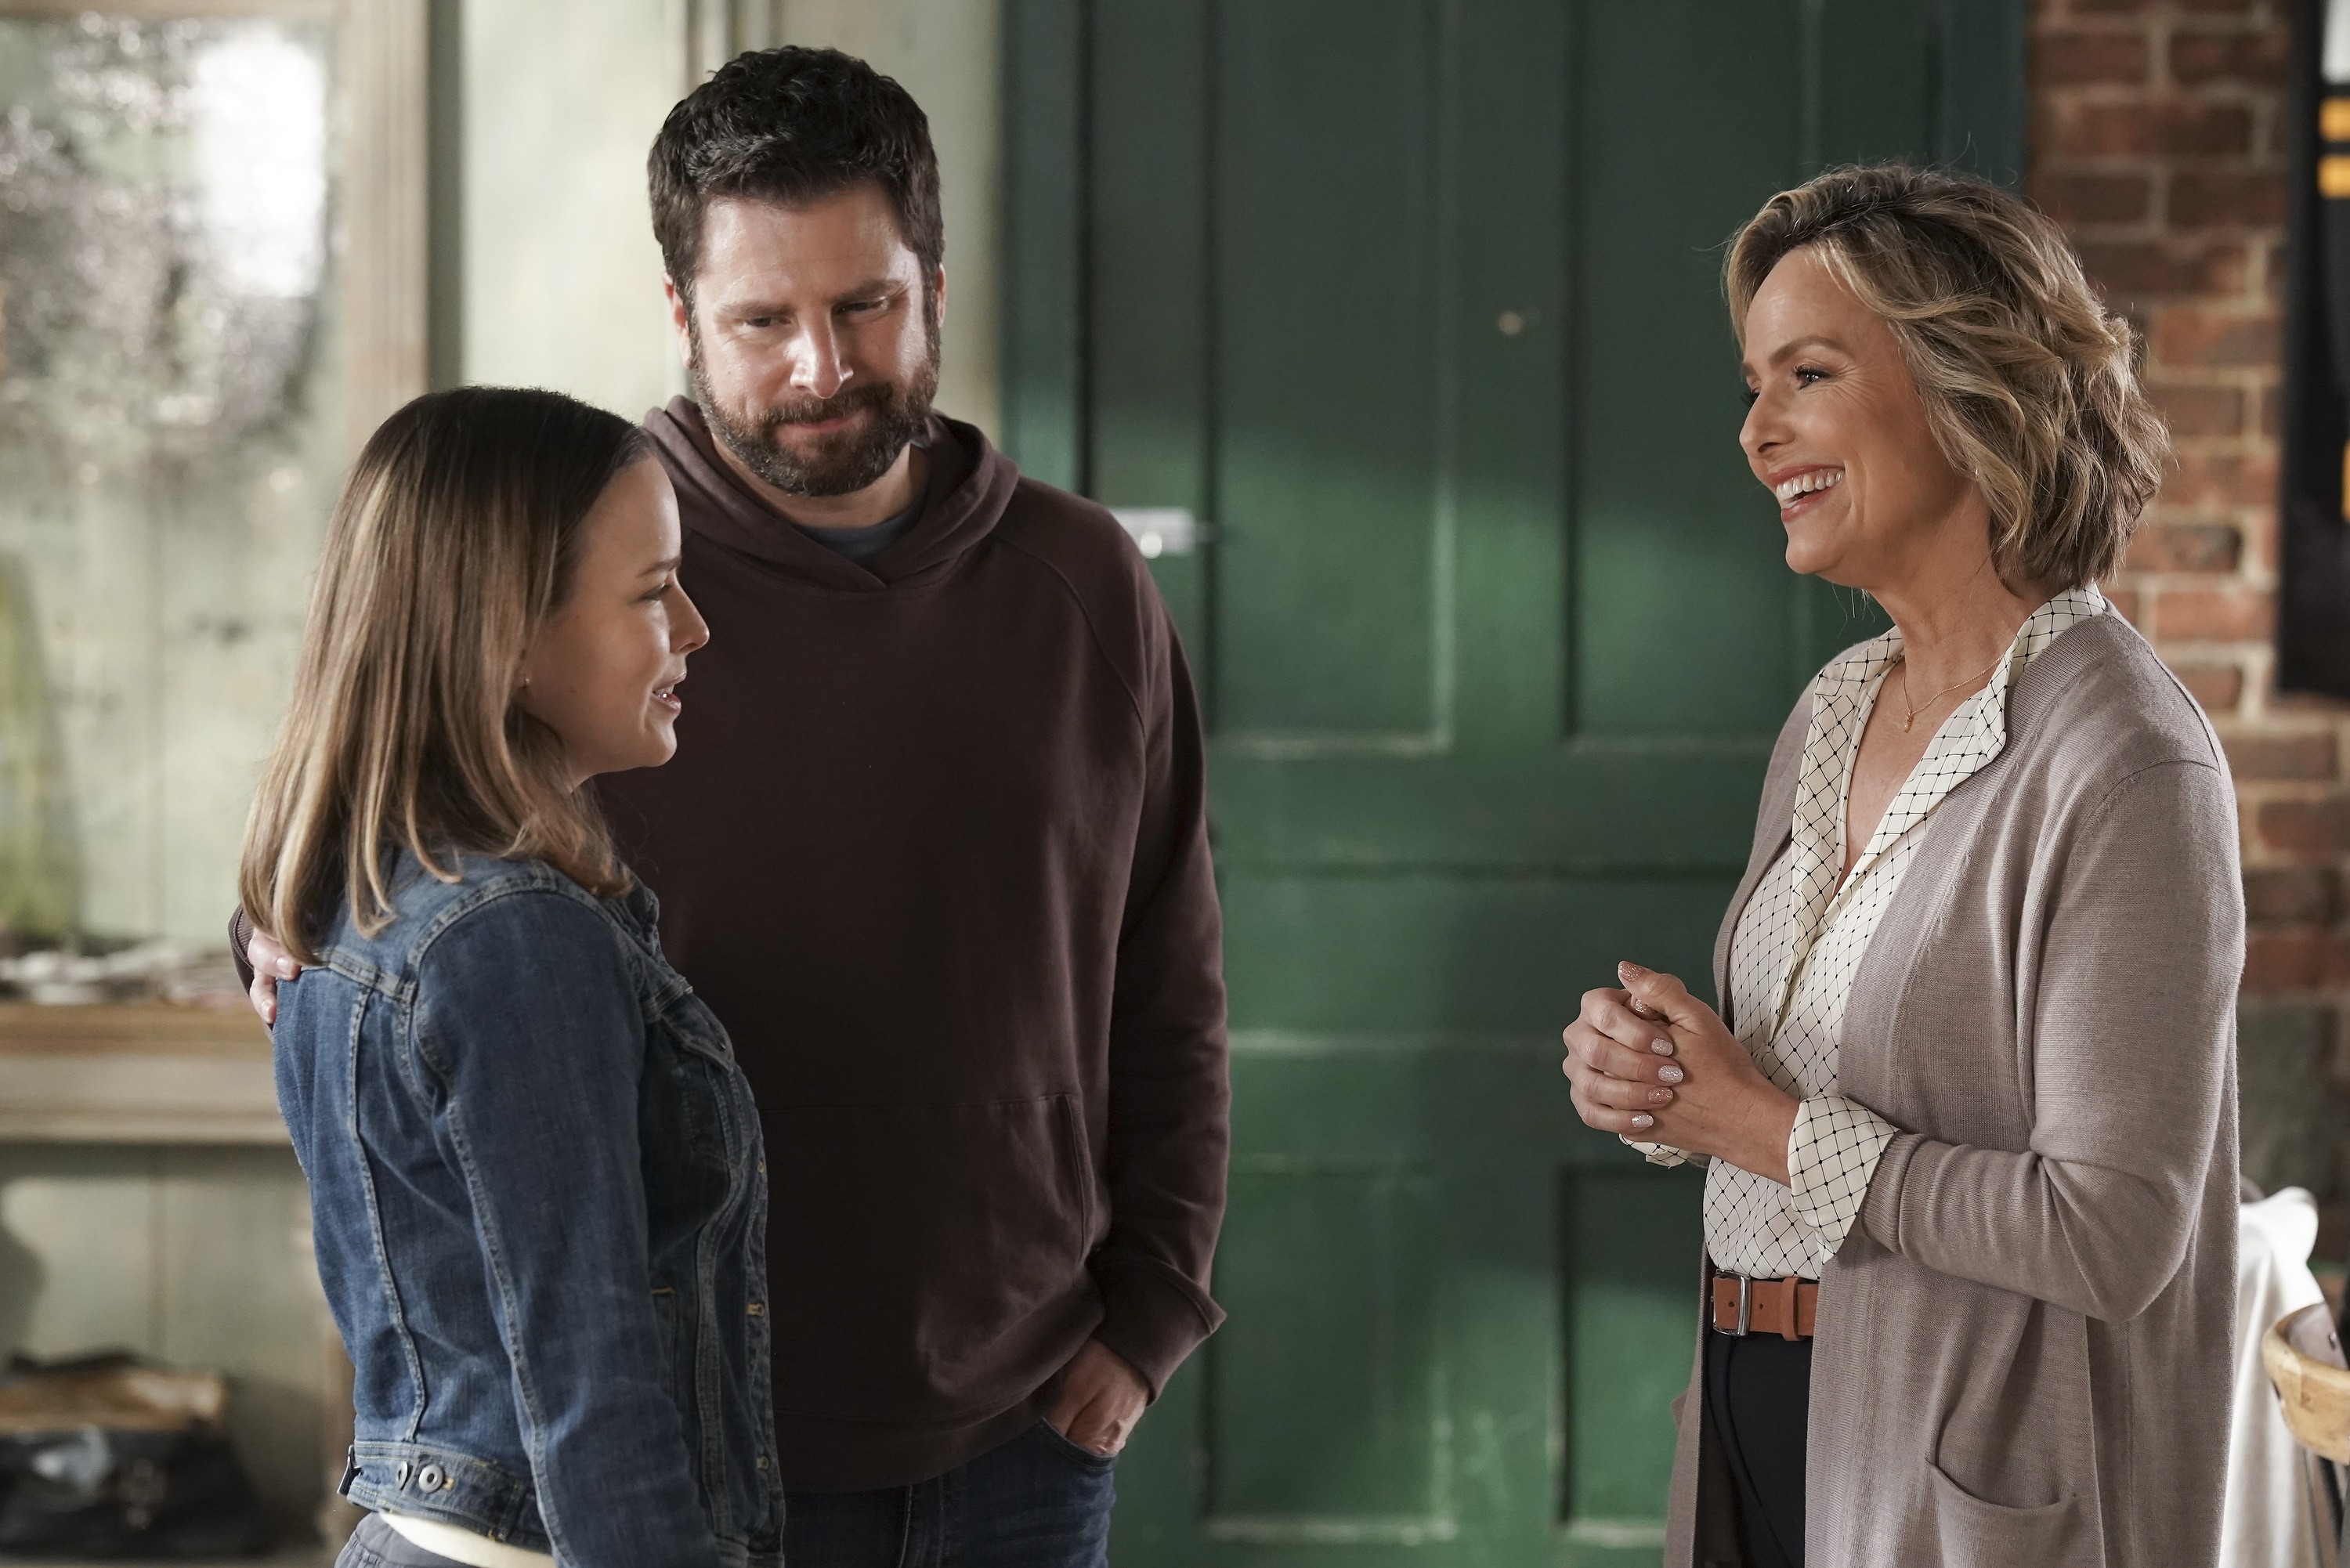 'A Million Little Things' Season 4 Episode 19 press photos reveal Allison Miller, James Roday Rodriguez, and Melora Hardin smiling together as Maggie, Gary, and Patricia